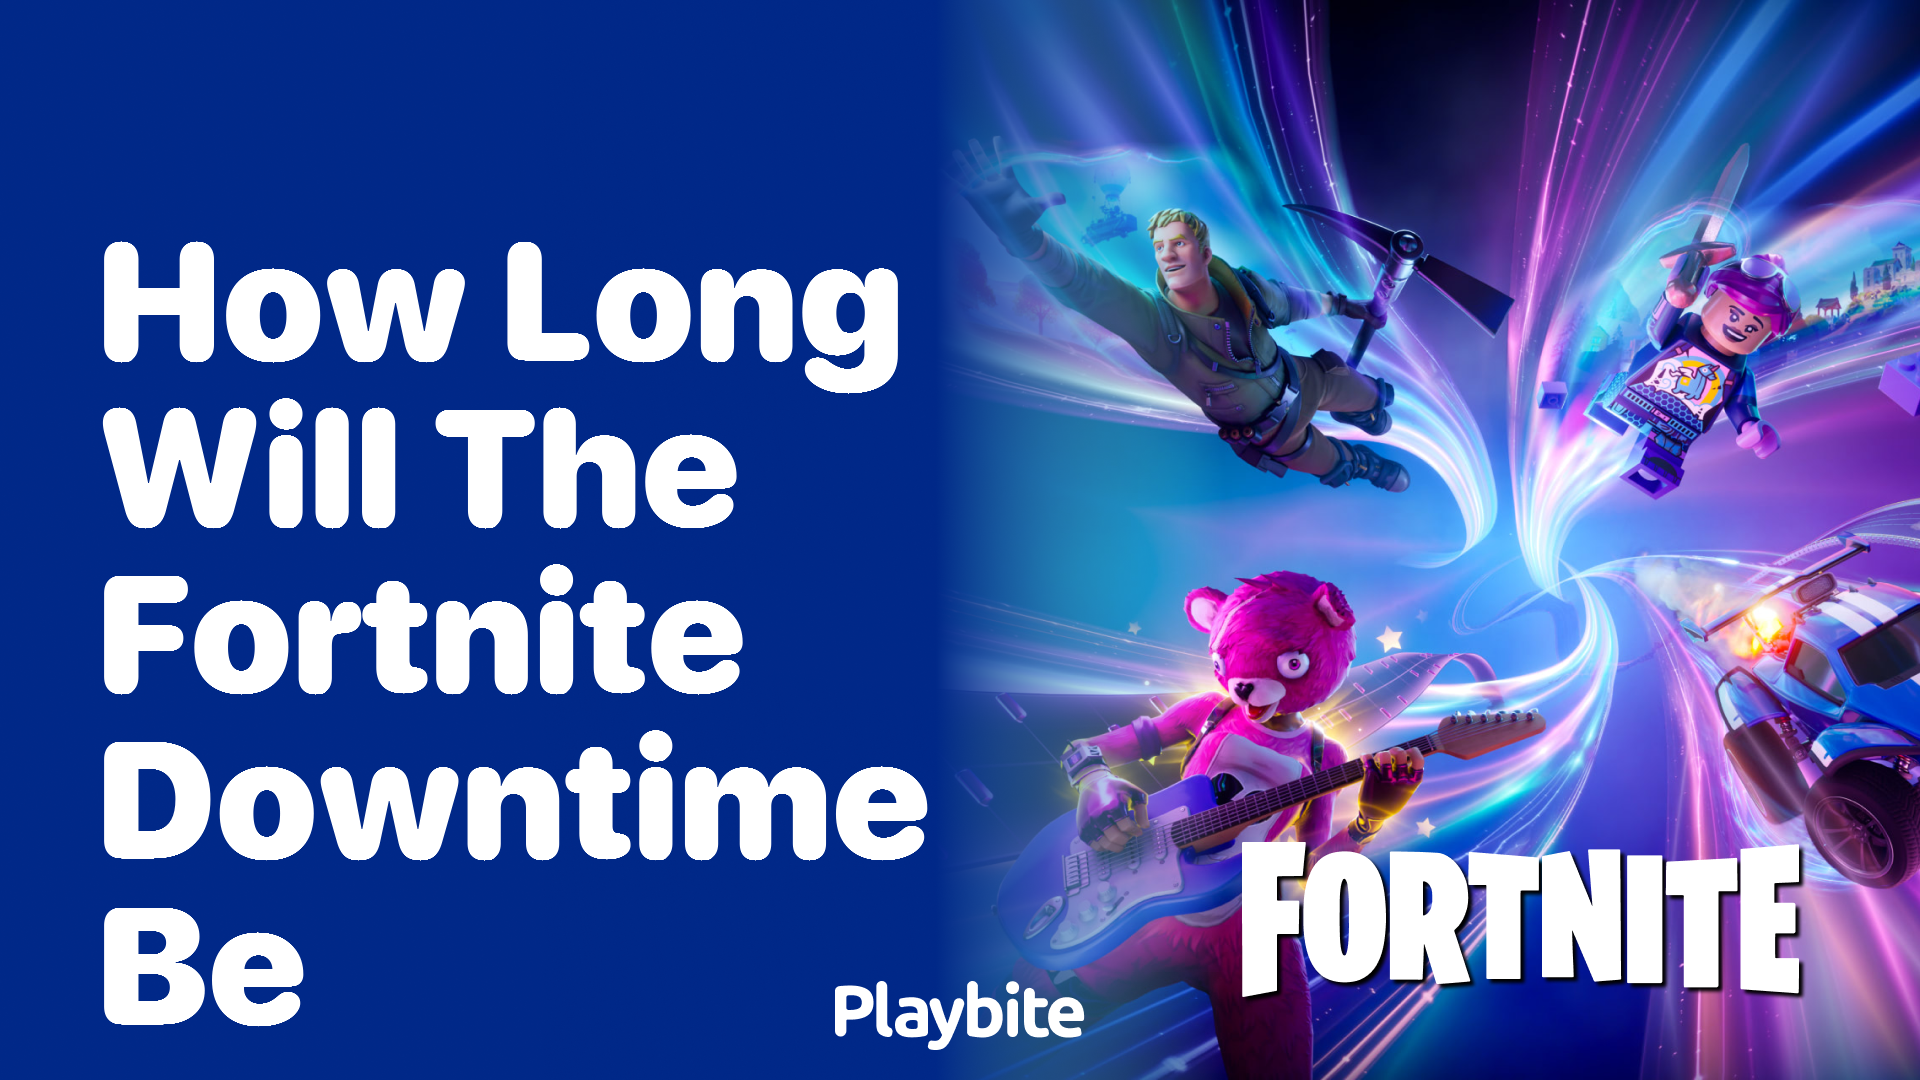 How long is fortnite downtime